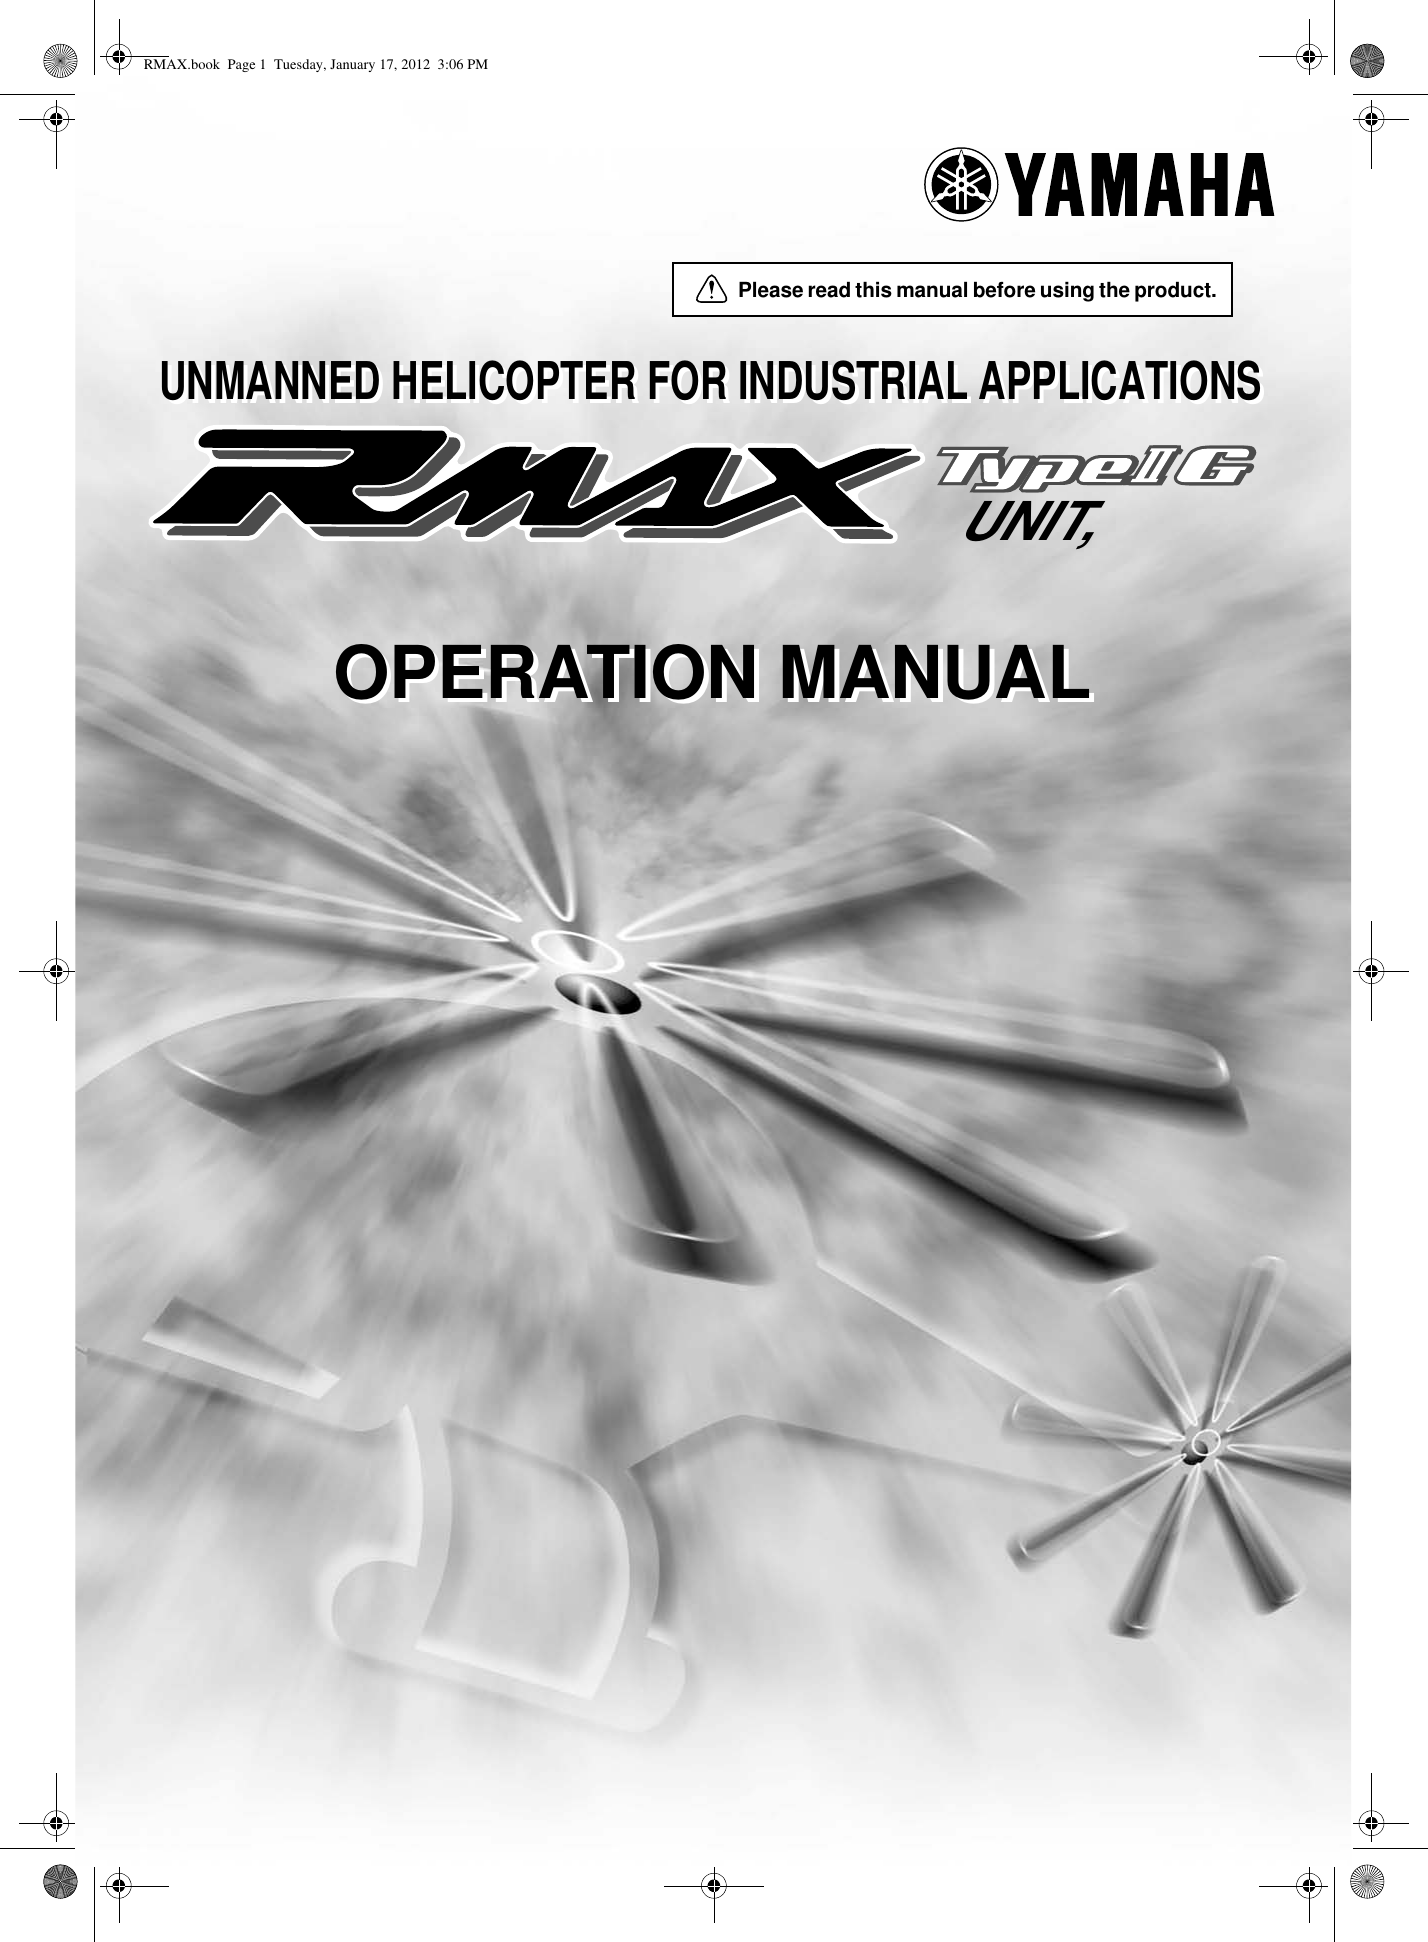 OPERATION MANUALOPERATION MANUALPlease read this manual before using the product.UNMANNED HELICOPTER FOR INDUSTRIAL APPLICATIONSUNMANNED HELICOPTER FOR INDUSTRIAL APPLICATIONSUNIT, RMAX.book  Page 1  Tuesday, January 17, 2012  3:06 PM